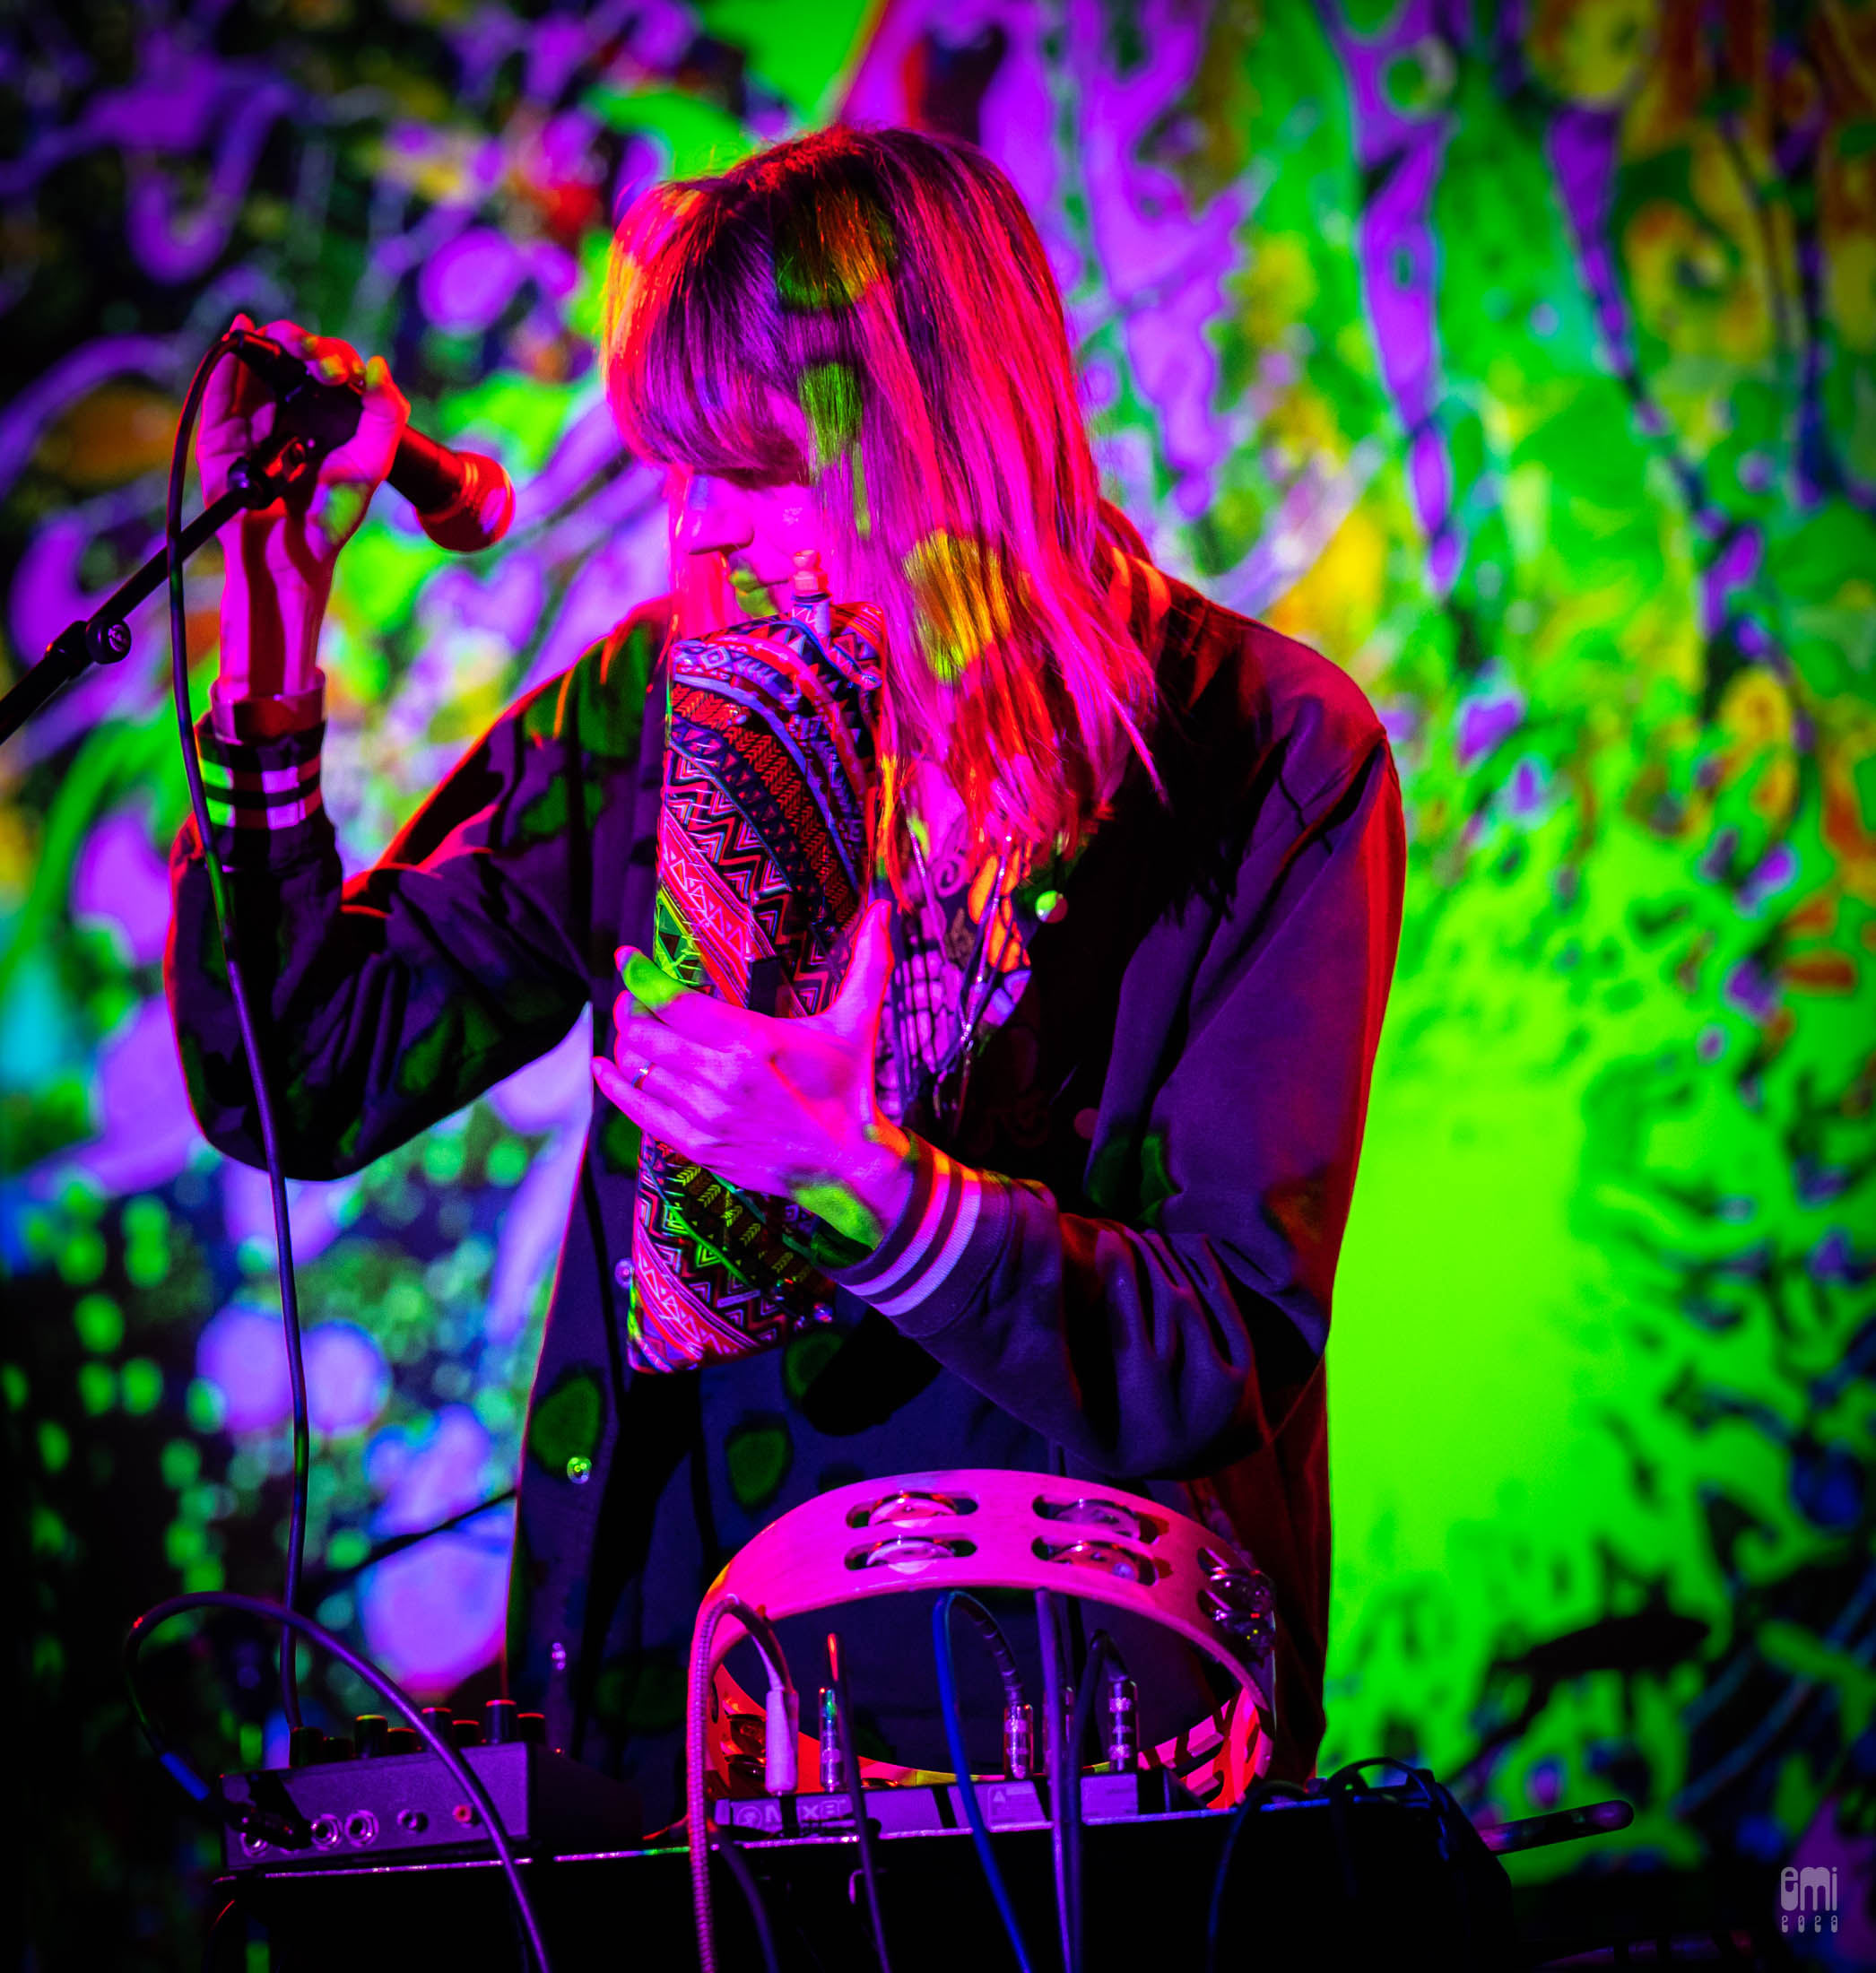 2023.2.18 Extra Classic opens for Sister Nancy with Mad Alchemy Liquid Light Show at The Chapel, San Francisco, photo by emi